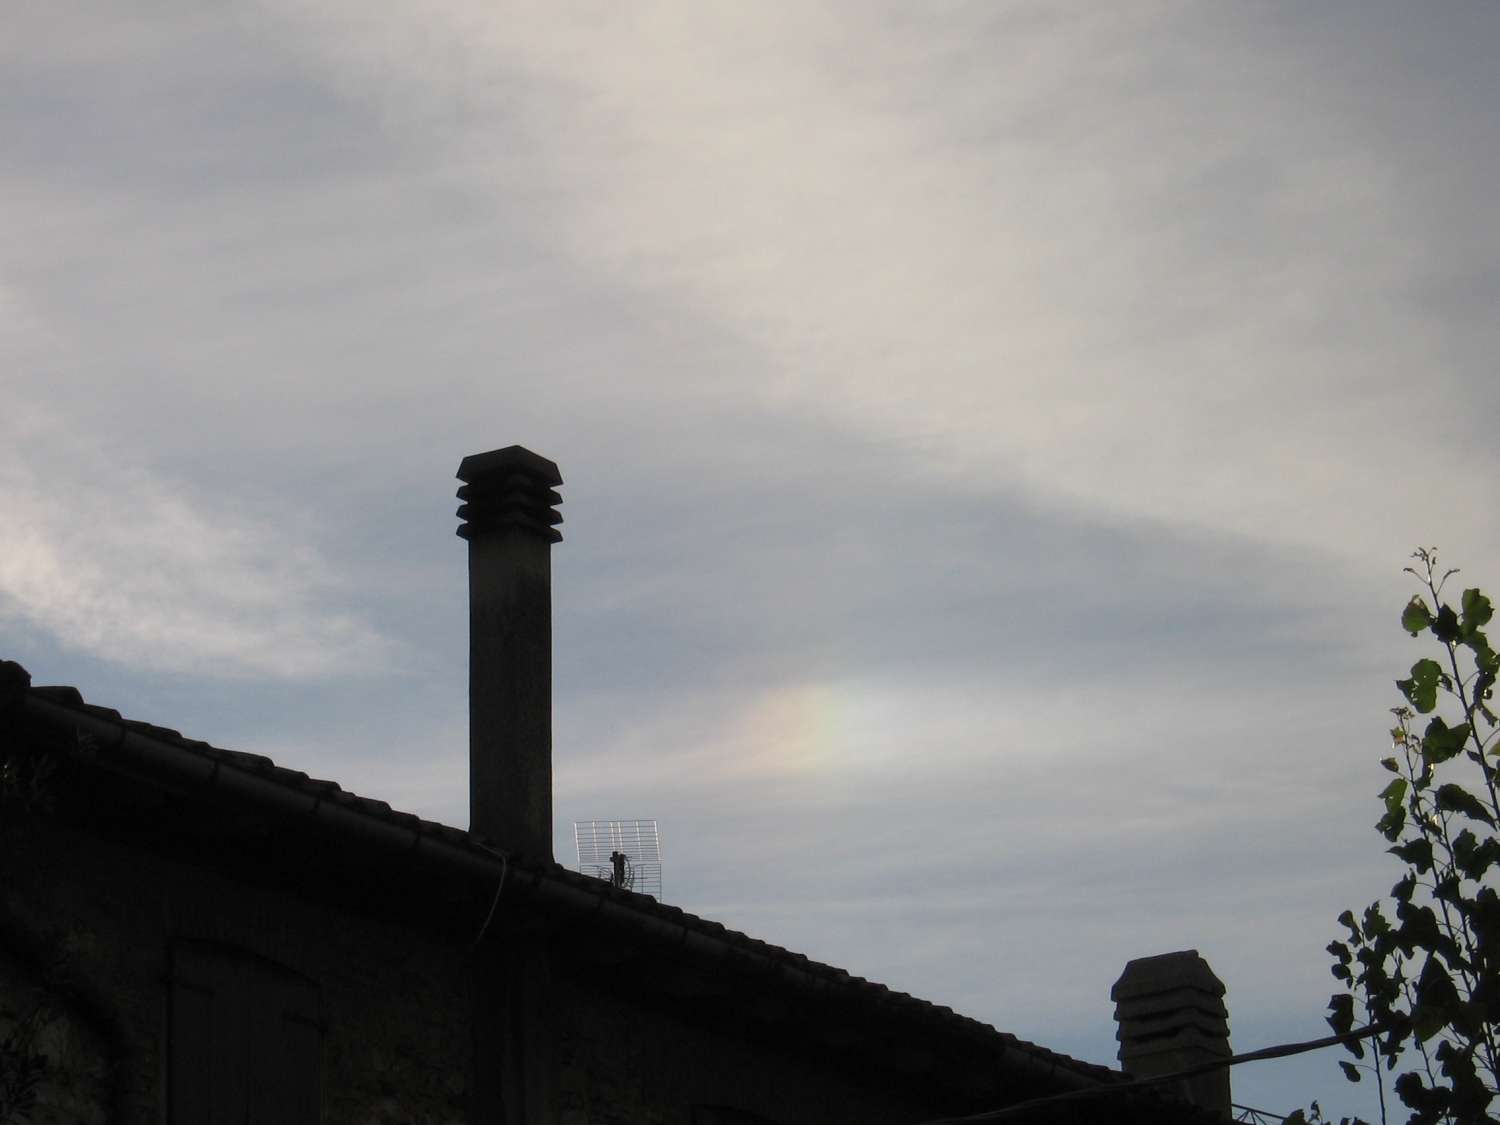 Right sundog: 58 KB; click on the image to enlarge at 1500x1125 pixels